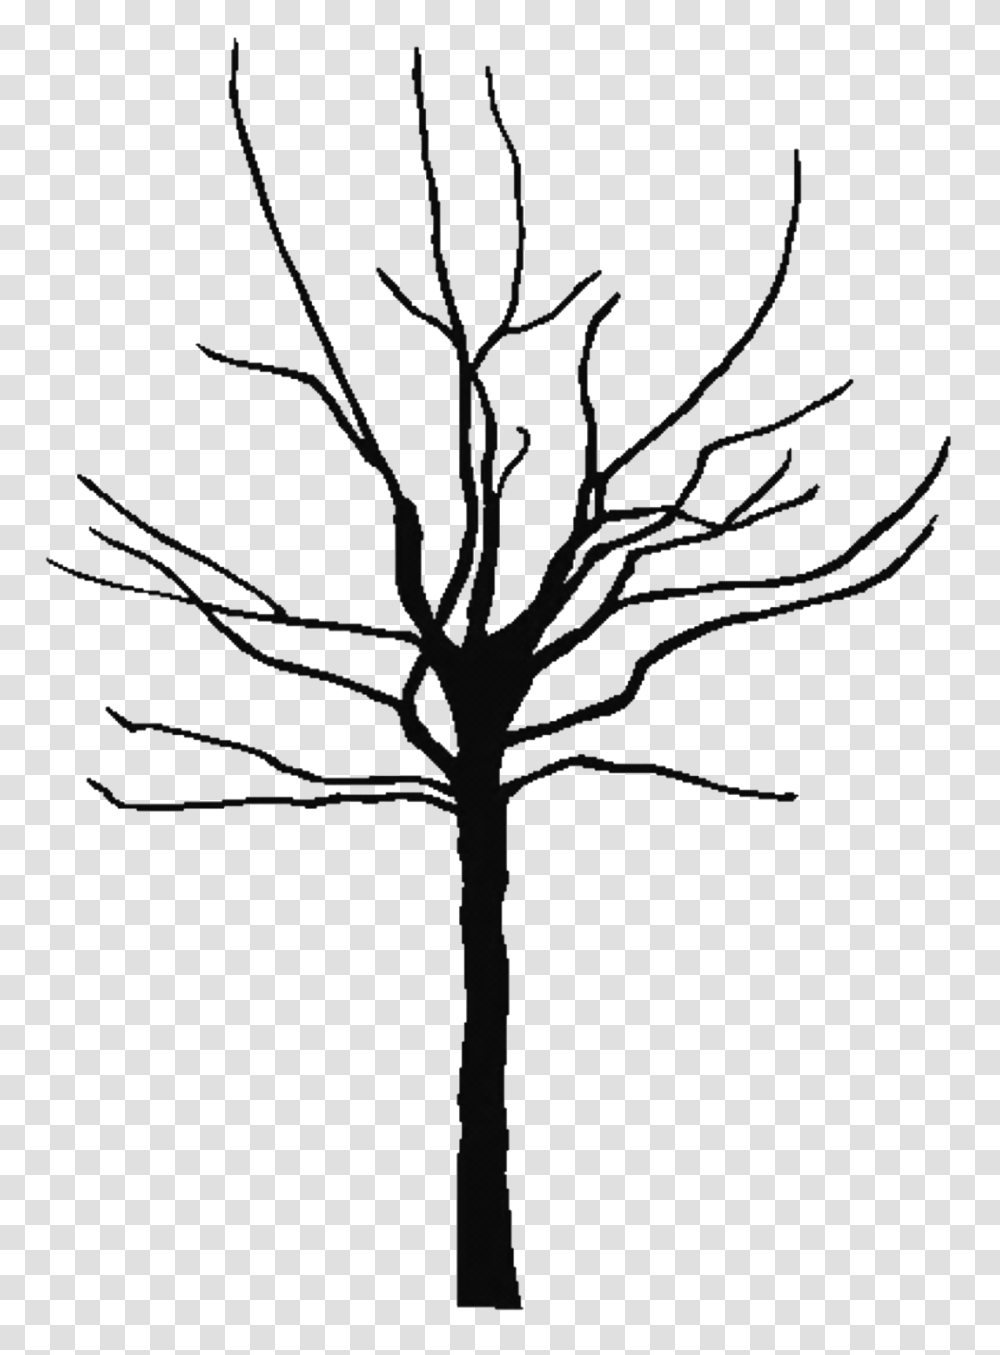 Bare Tree Clipart Black And White Hd Letters, Plant, Silhouette, Tree Trunk, Spider Transparent Png